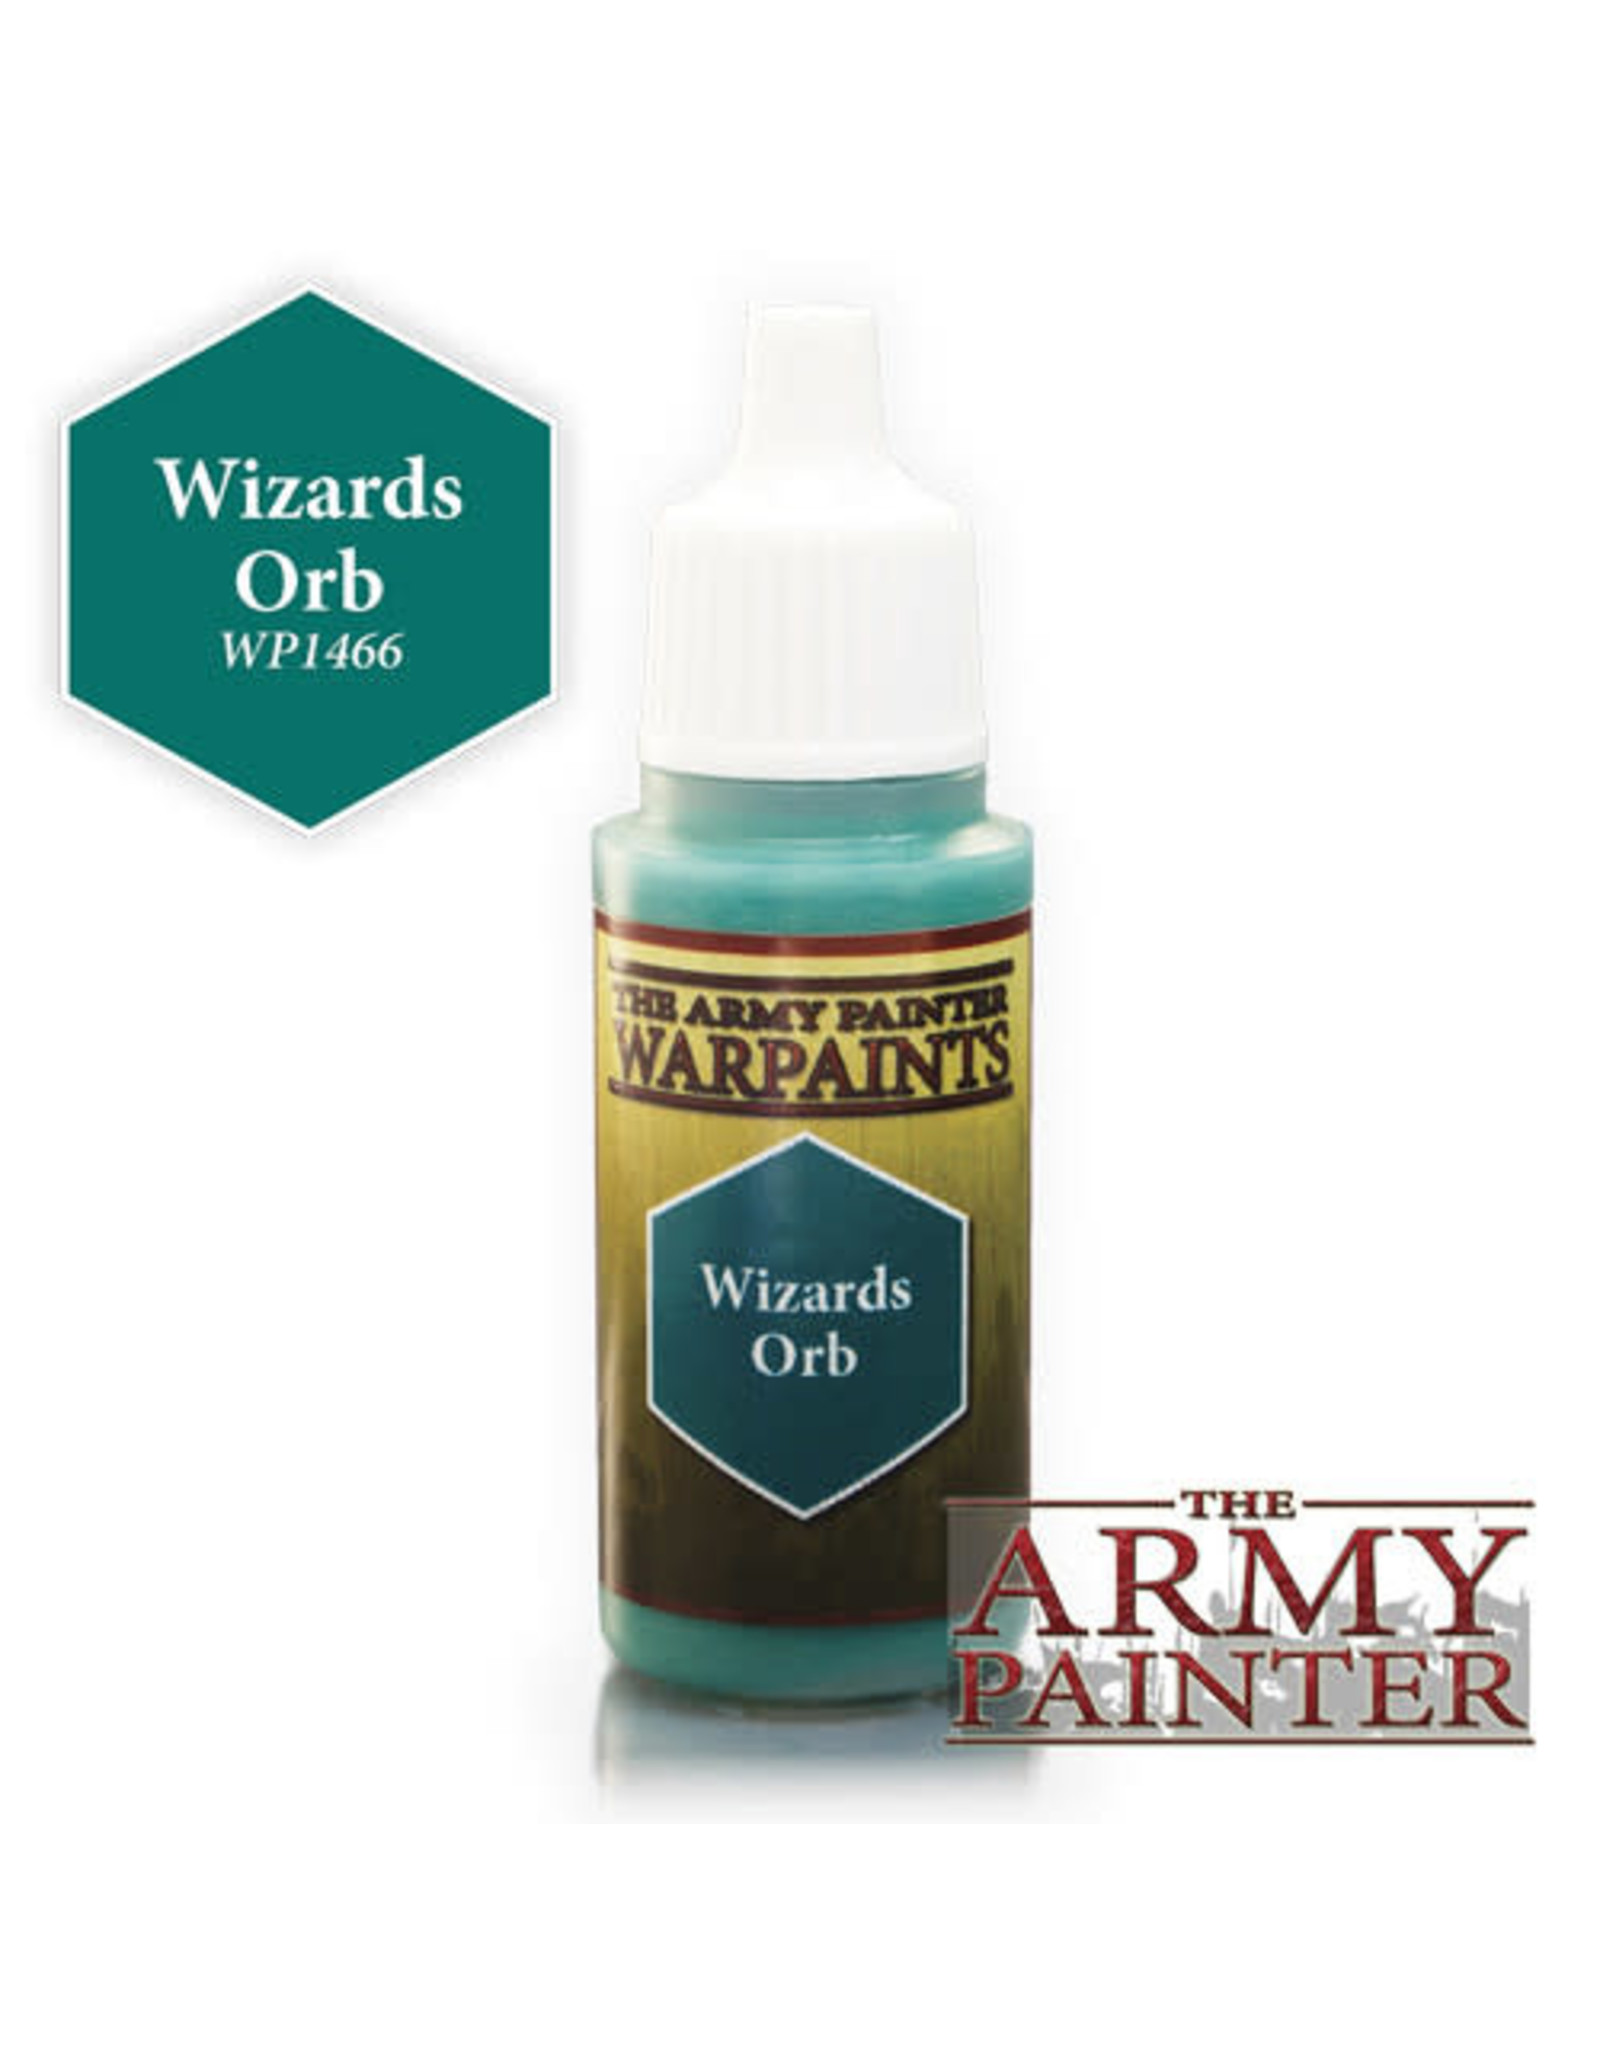 The Army Painter Warpaints: Wizards Orb 18ml